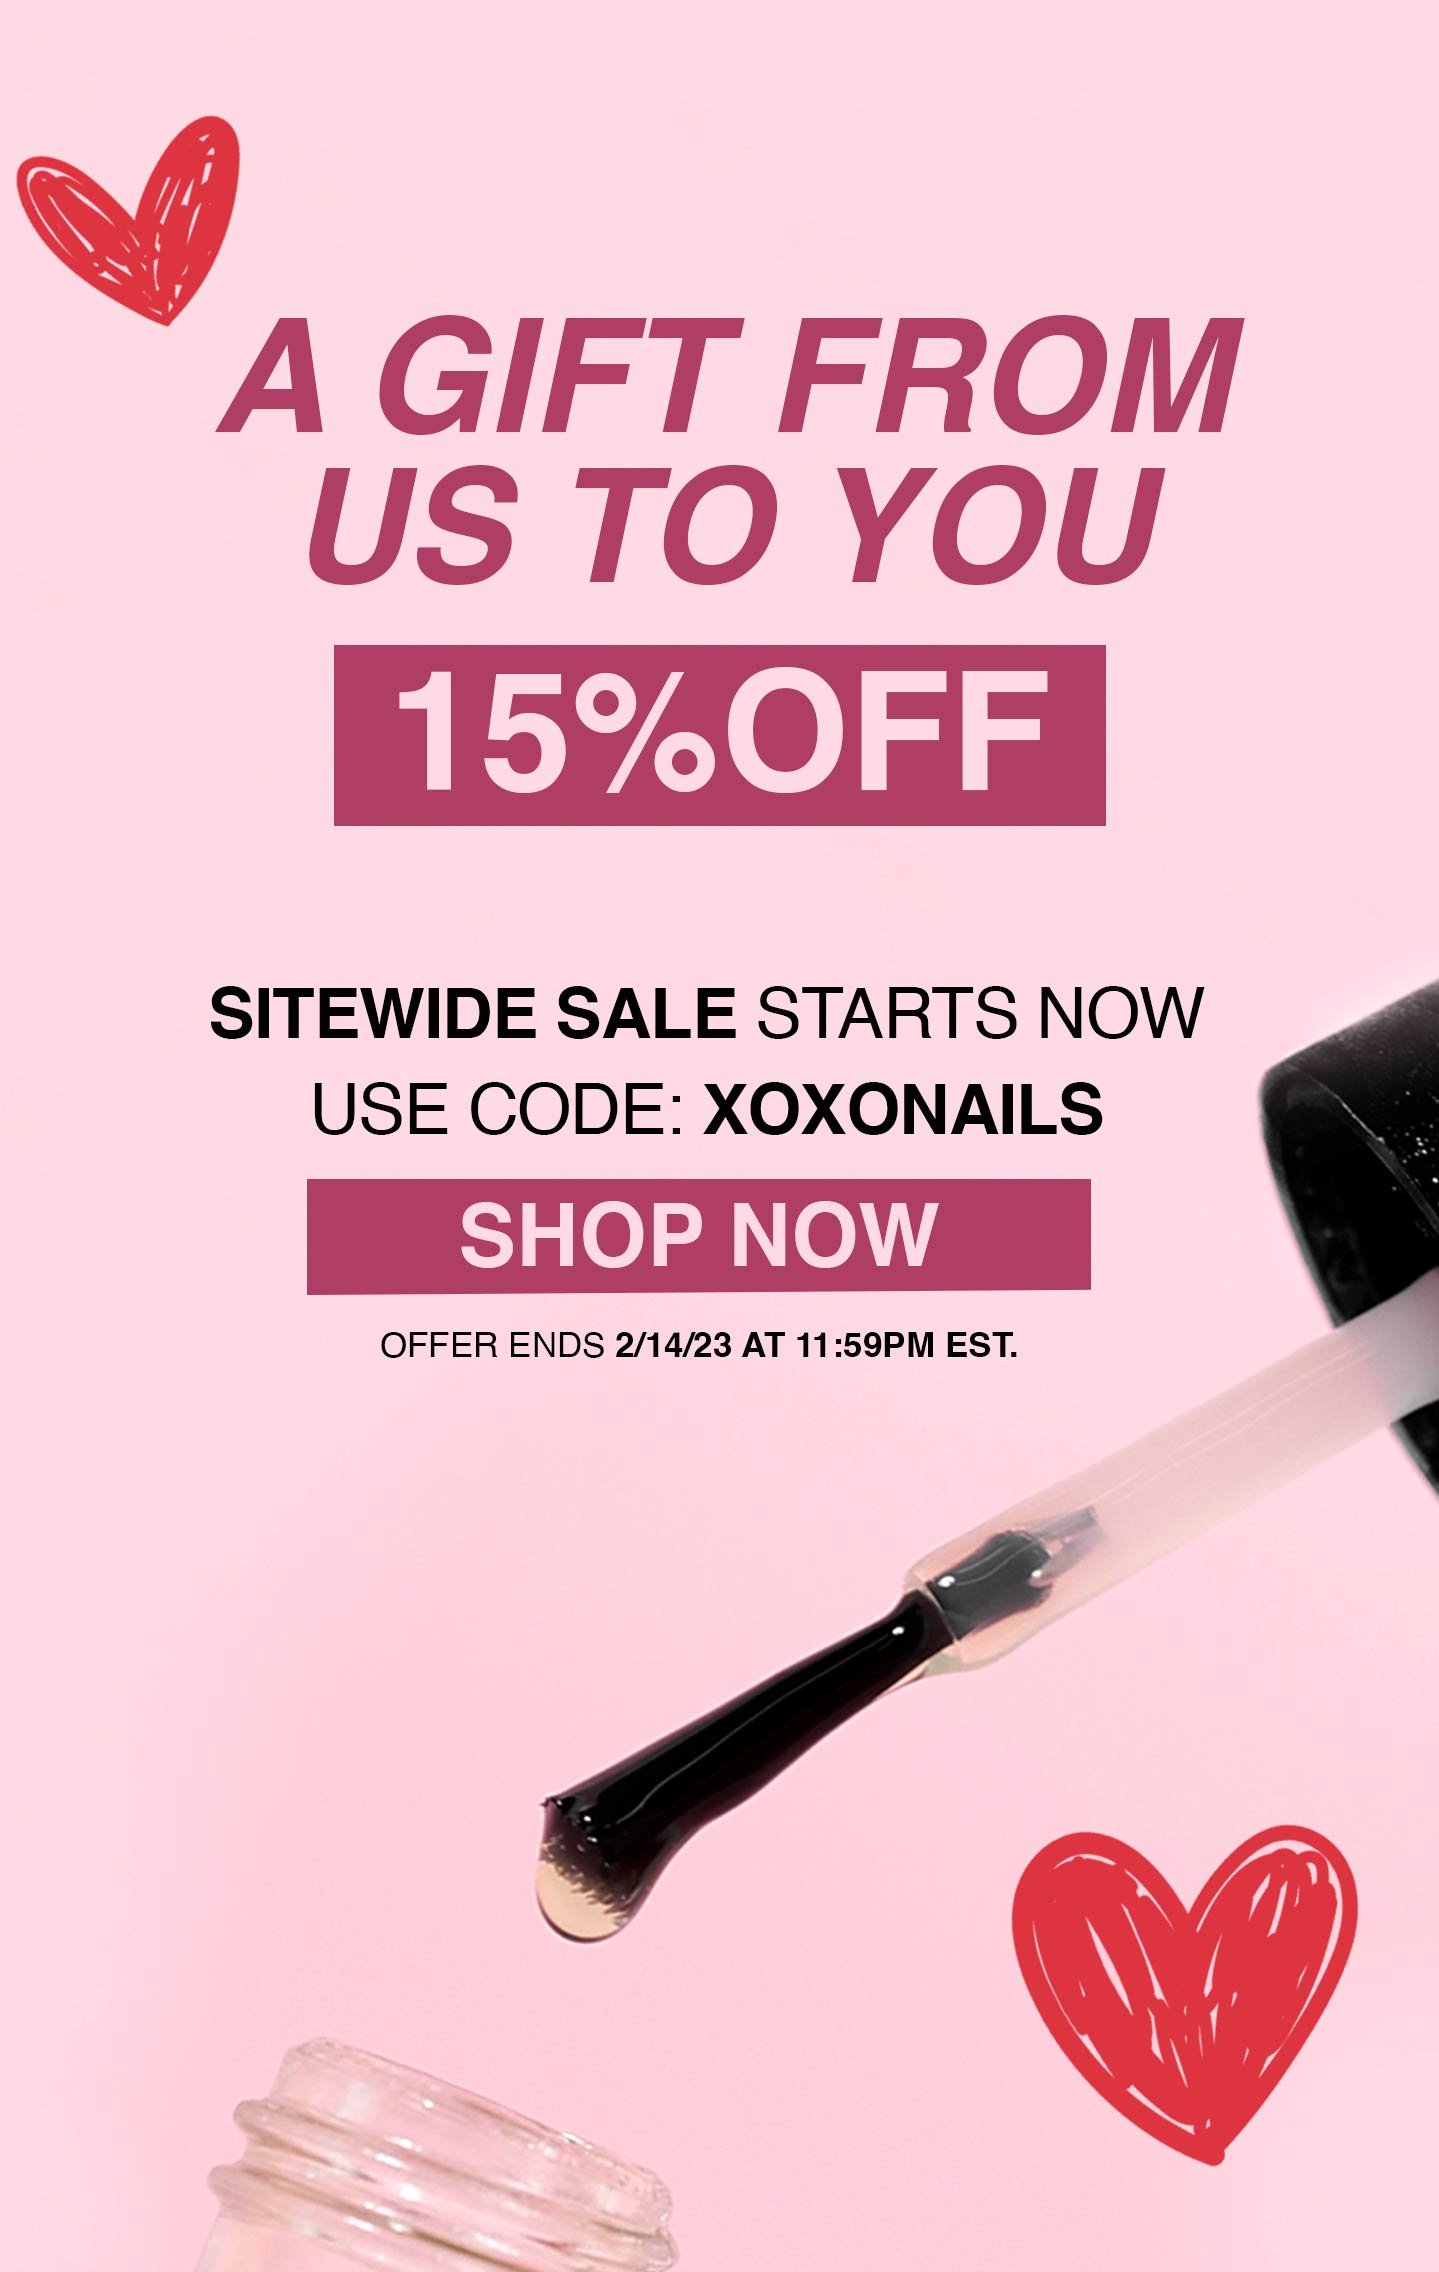 Probelle's Valentines Day Starts now! 15% OFF sitewide Use Code: XOXONAILS at checkout to save. Sale ends 12/14/23 at 11:59pm EST.